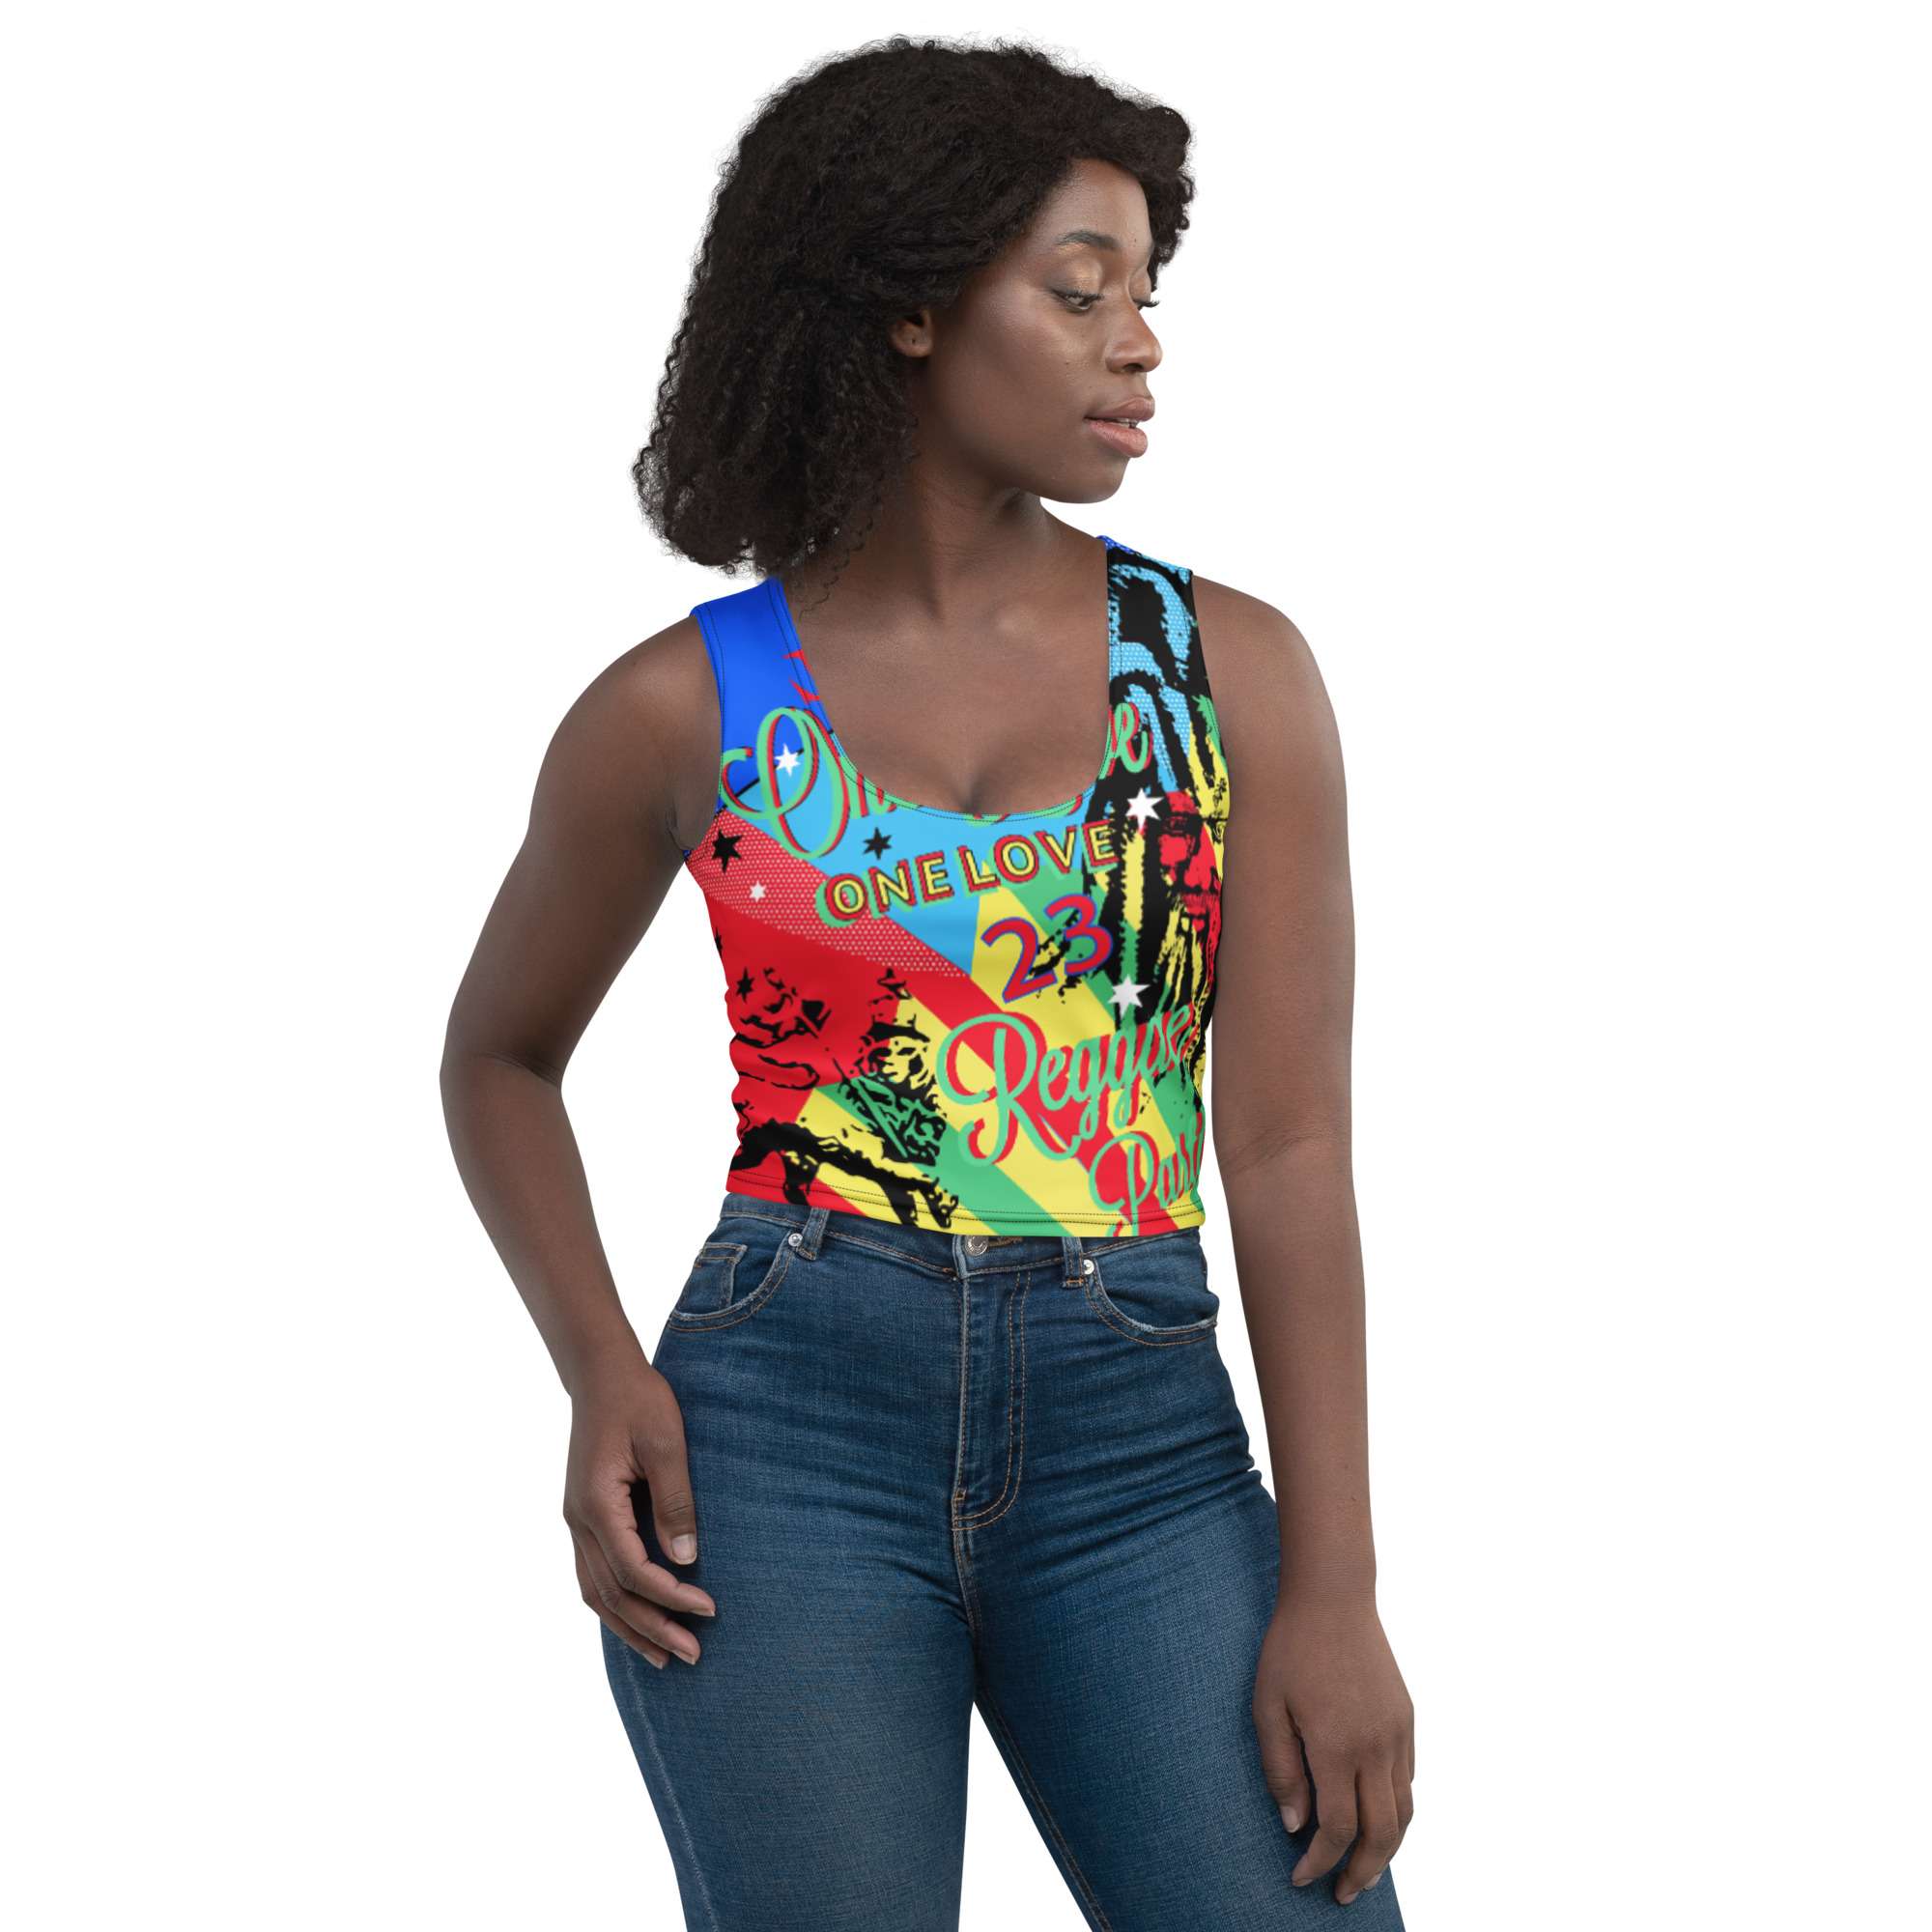 One Love Reggae Rasta Party Crop Top female model front view. Four way stretch comfortable micro fibre fabric in vivid colors and funky graphic design.